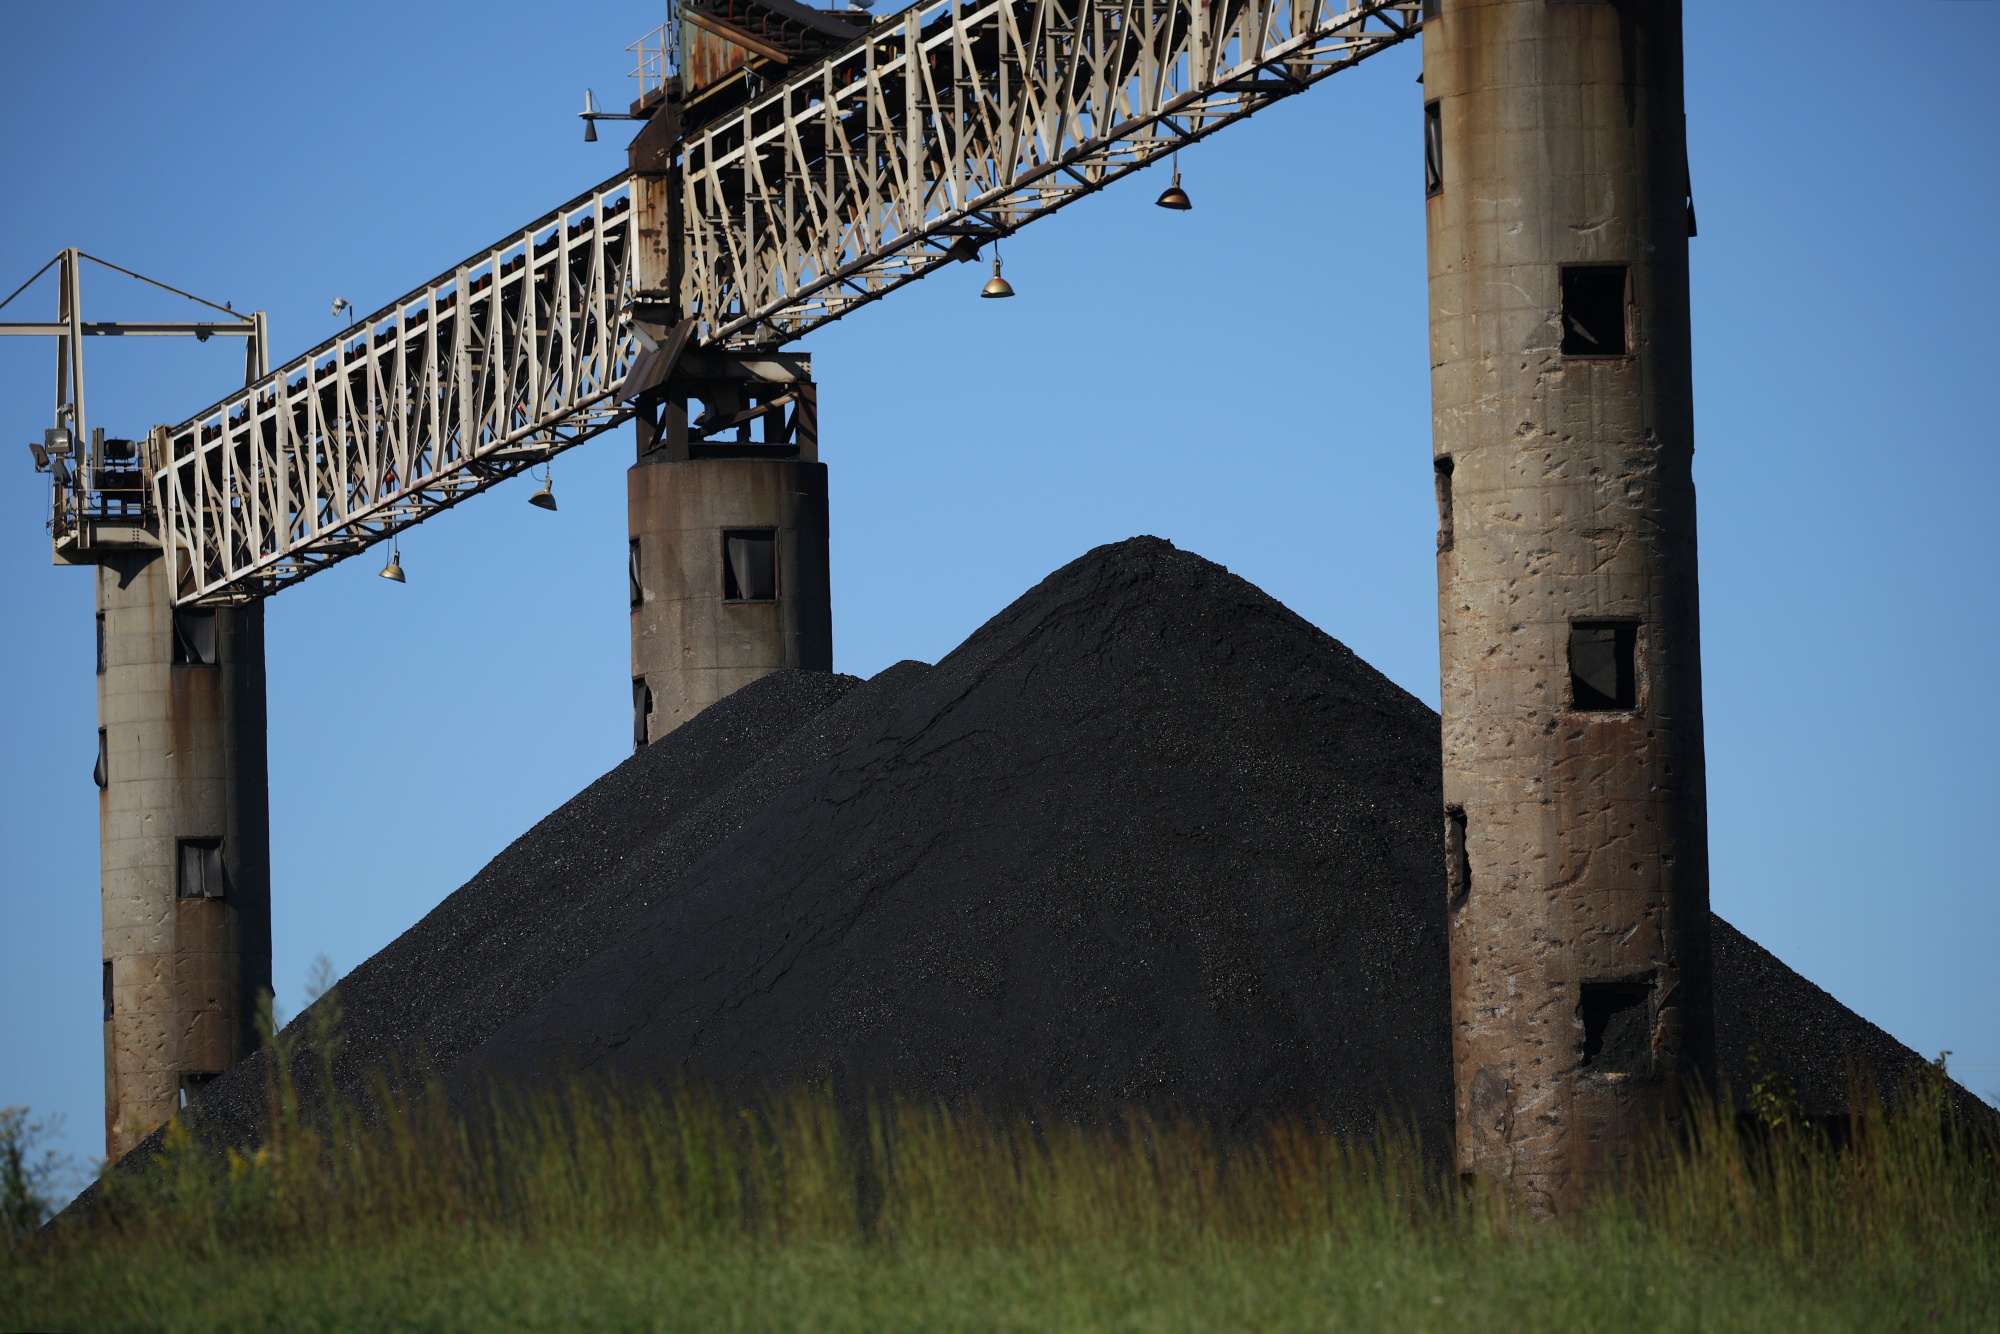 A coal mound on the grounds of the Peabody Energy Francisco coal mine.